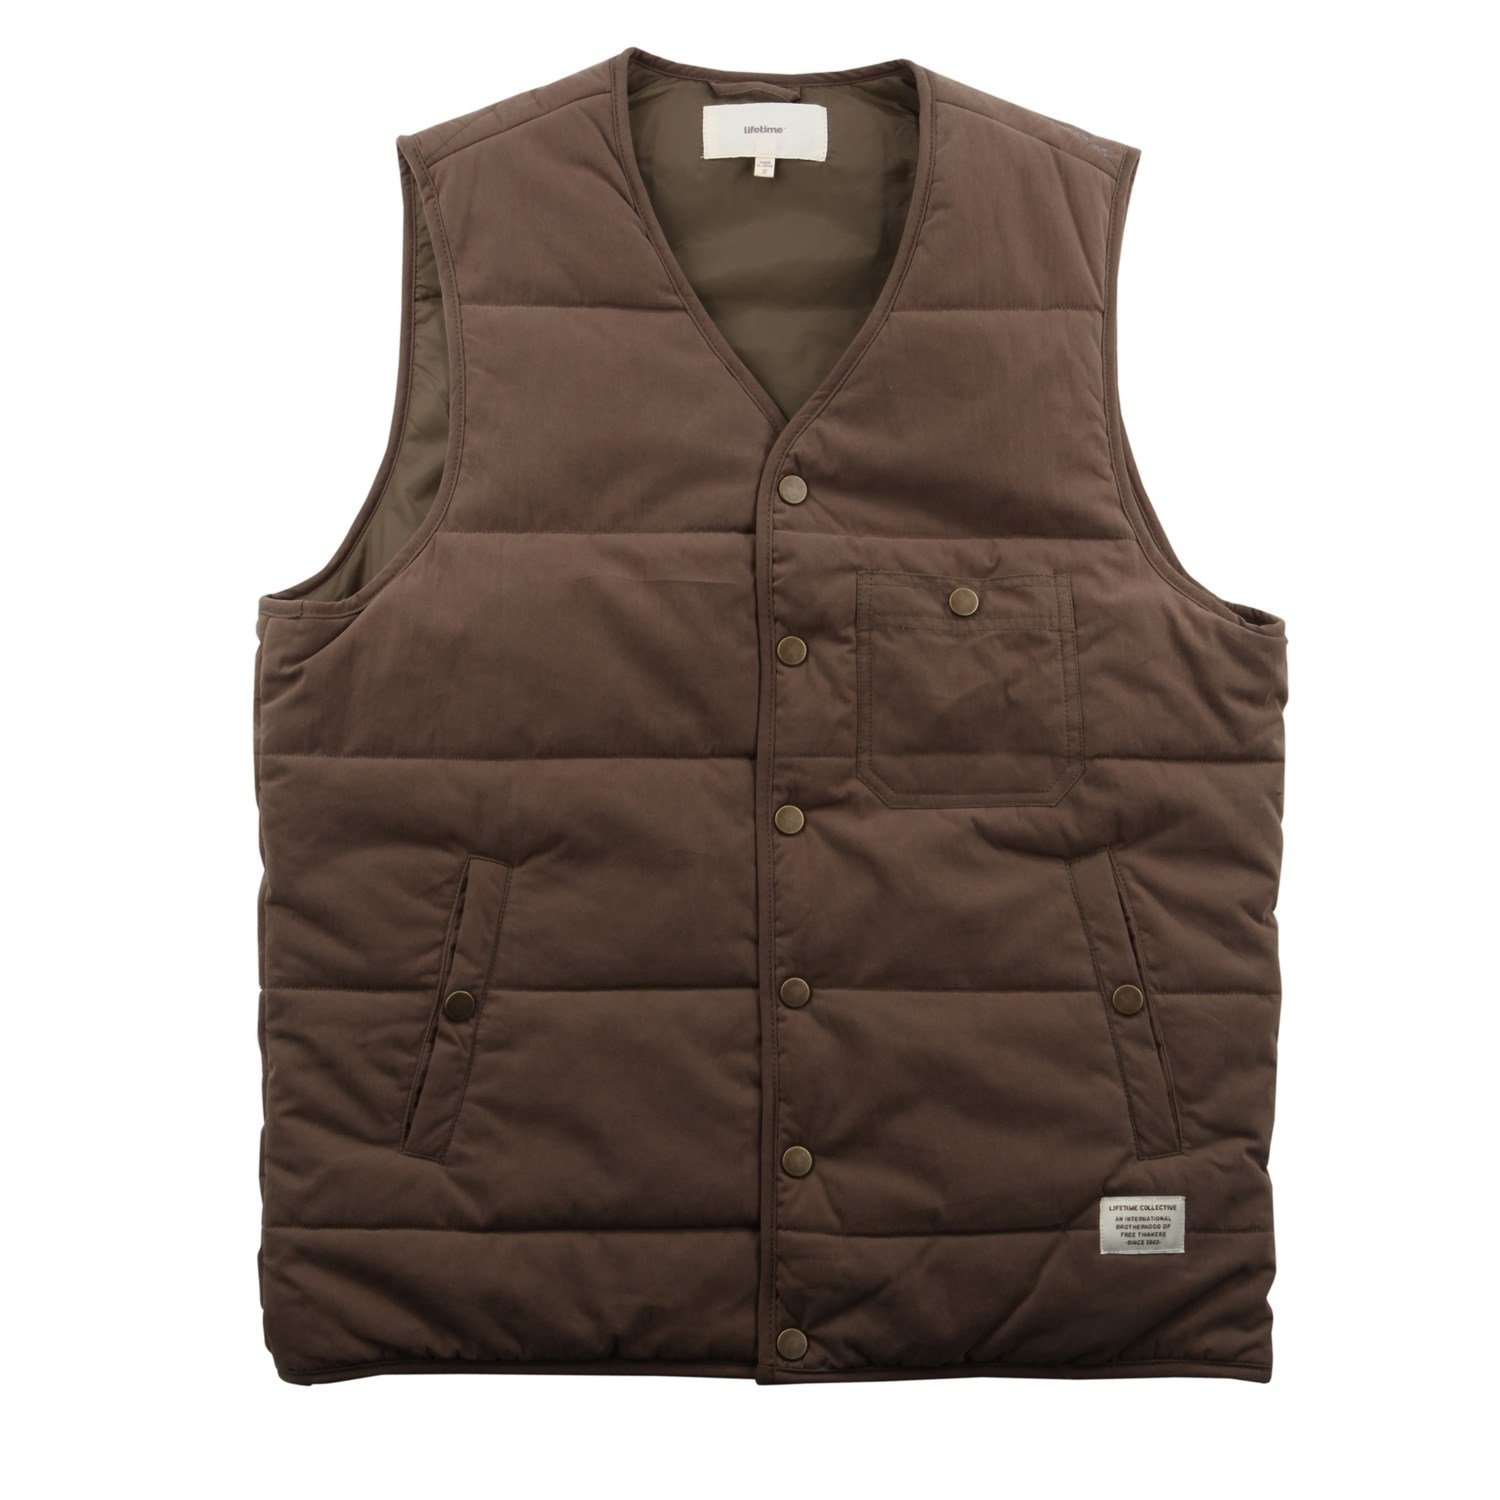 https://images.evo.com/imgp/zoom/58150/309549/lifetime-collective-moss-mountain-vest--front.jpg